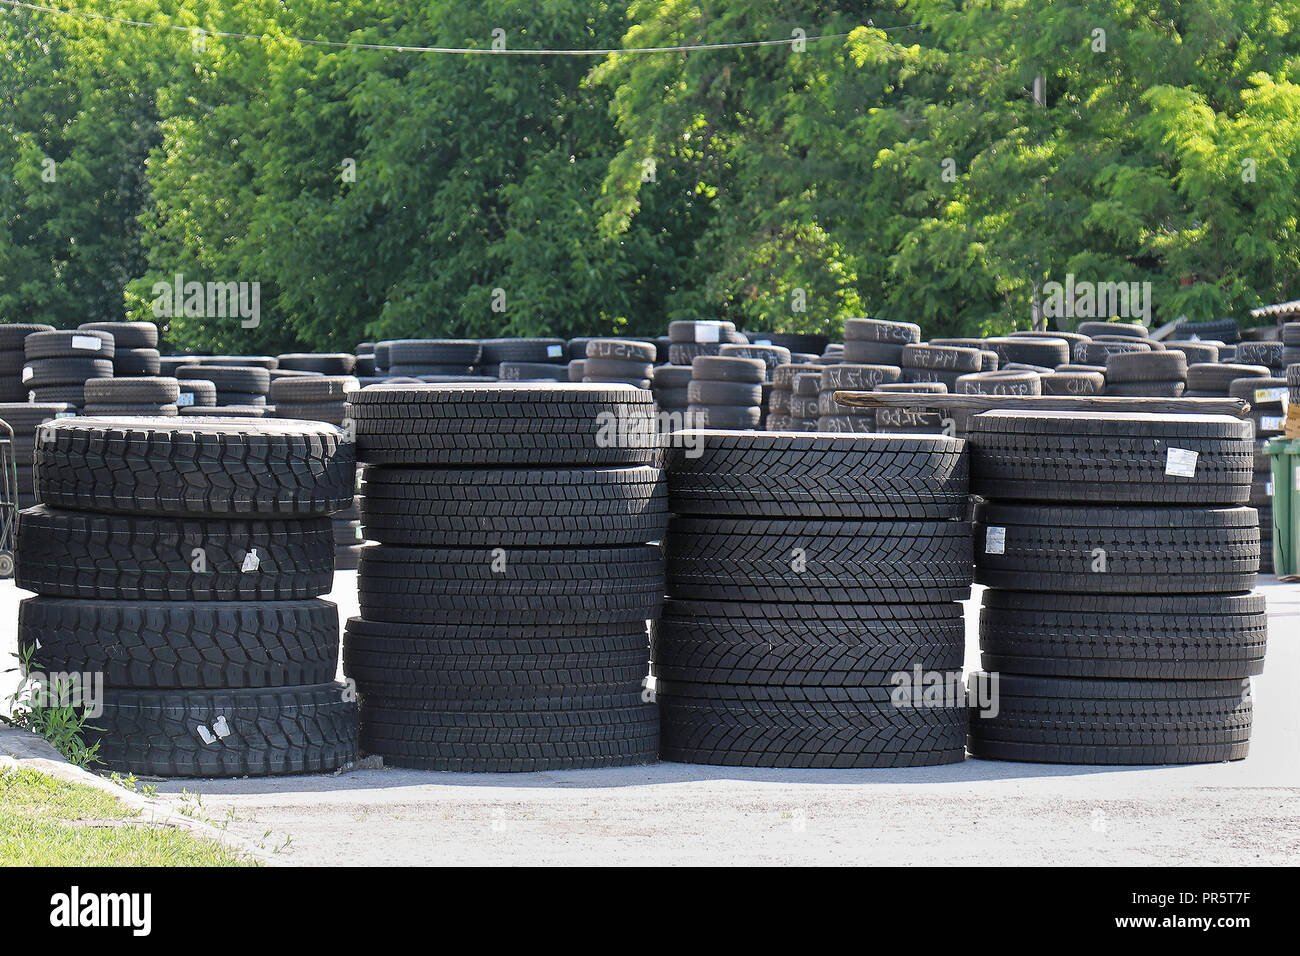 Outside storage warehouse with new and second hand car tires Stock Photo